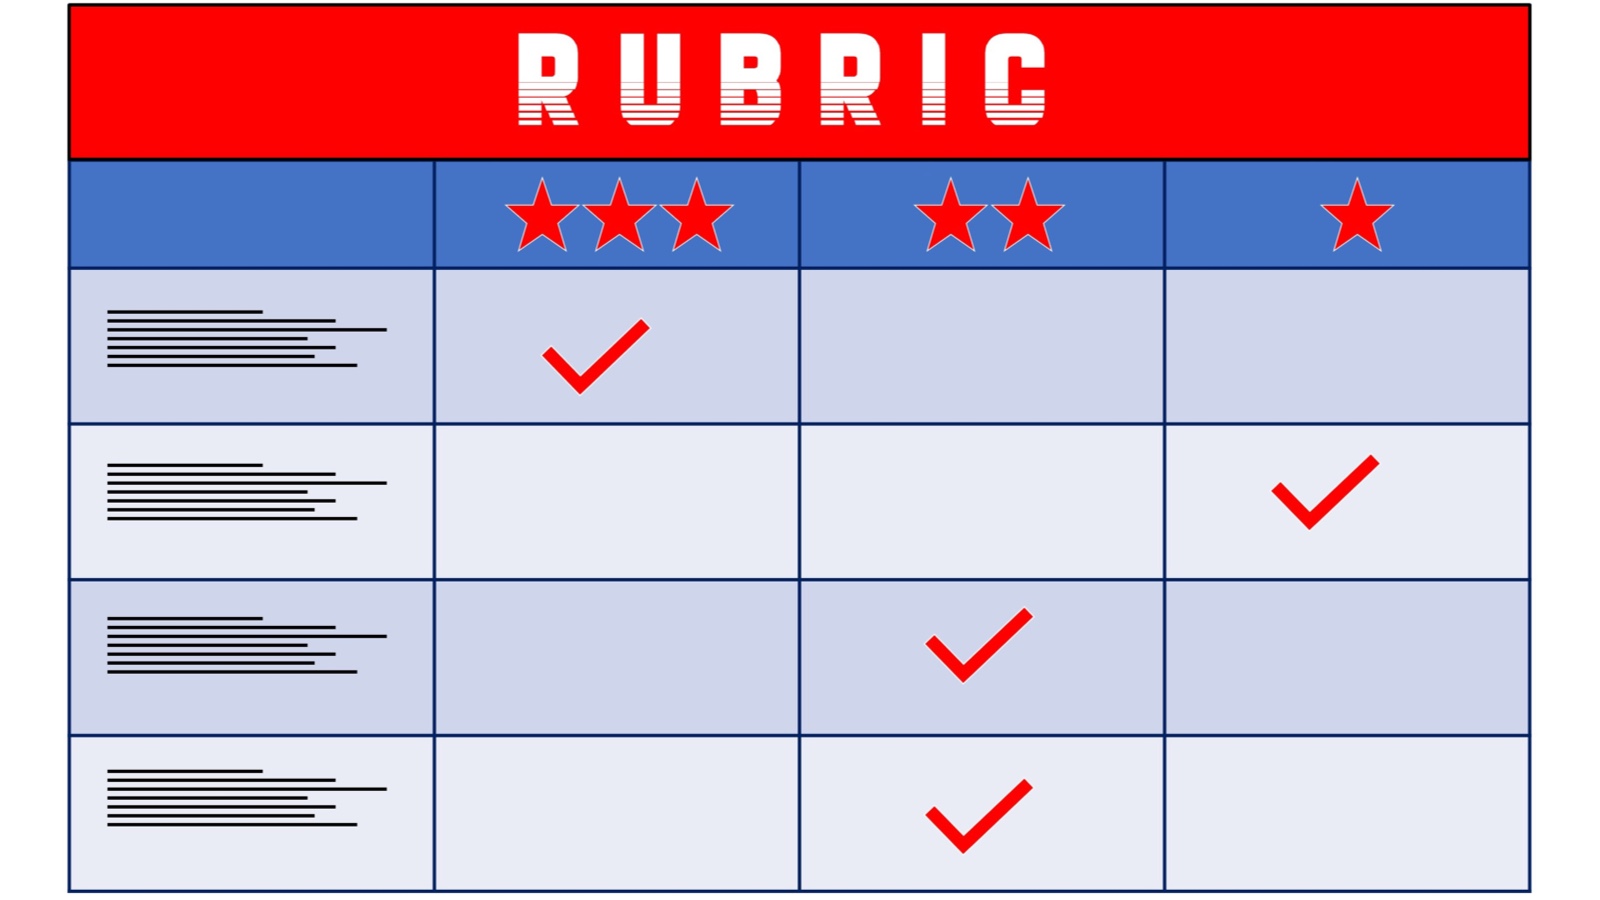 Chart titled RUBRIC with checkmarks in various boxes.